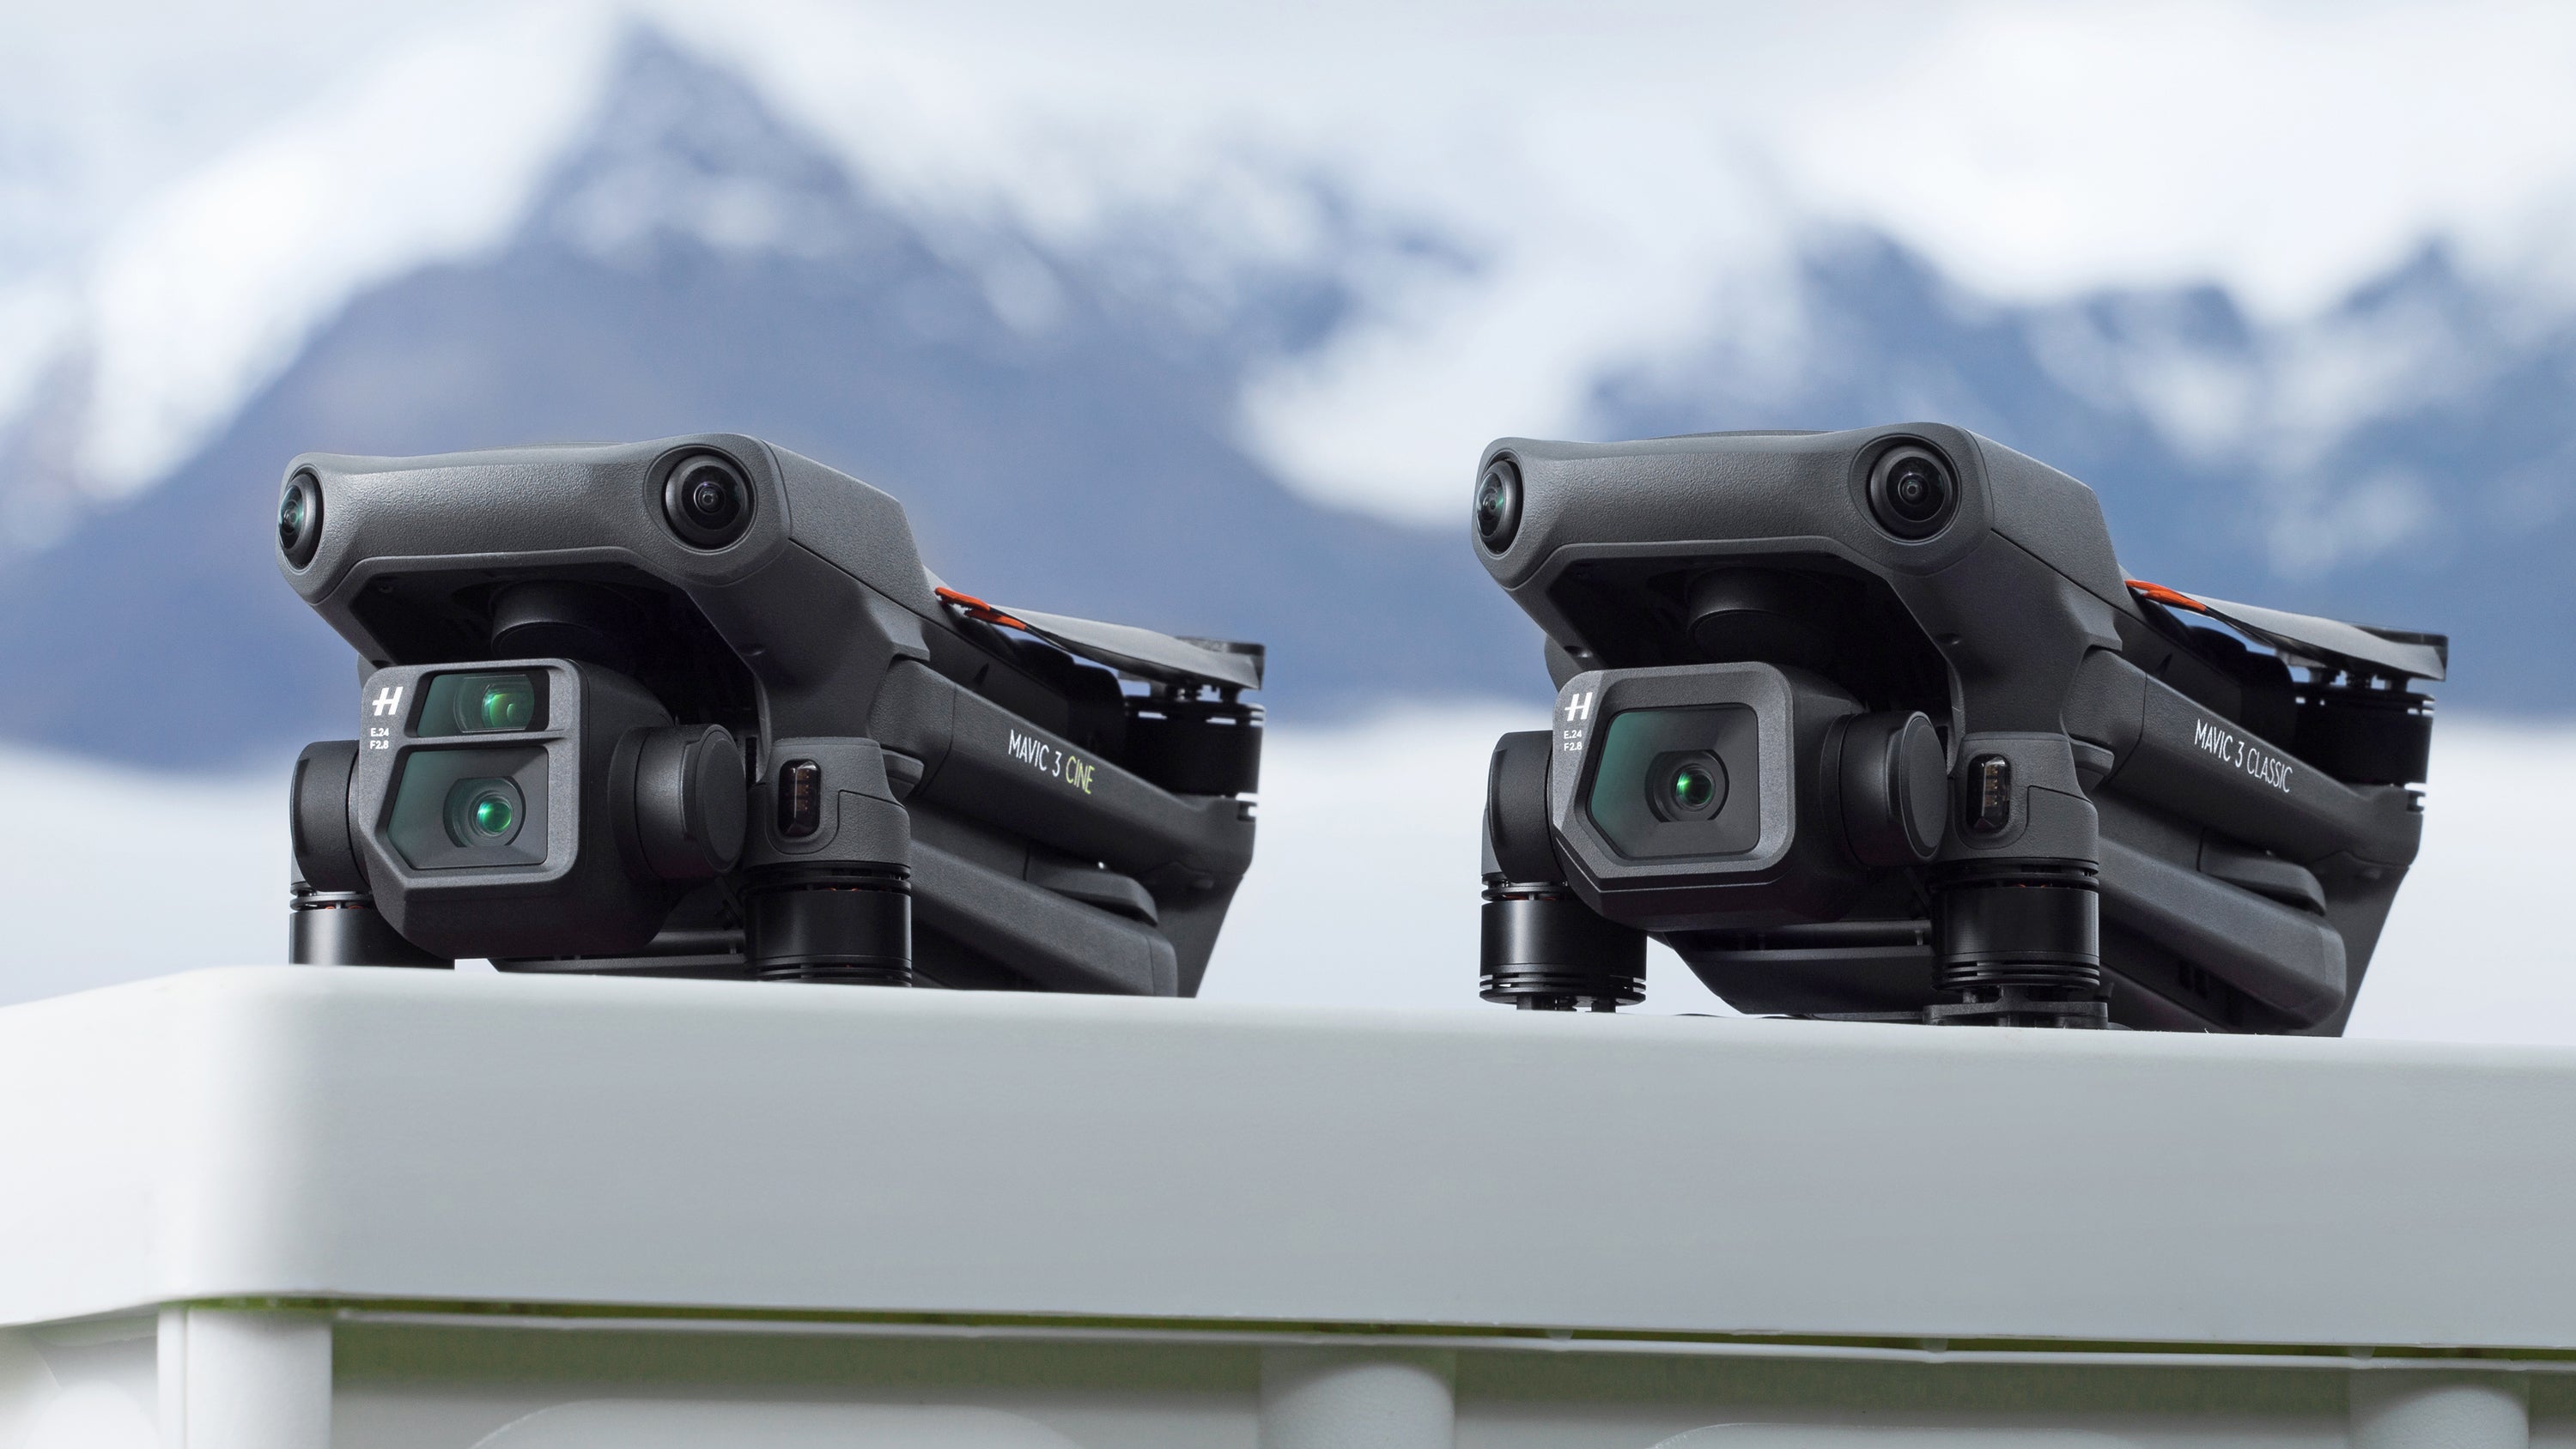 The only way to tell the DJI Mavic 3 Cine (left) from the new DJI Mavic 3 Classic (right) is to look at the front lens or lenses. (Image: DJI)